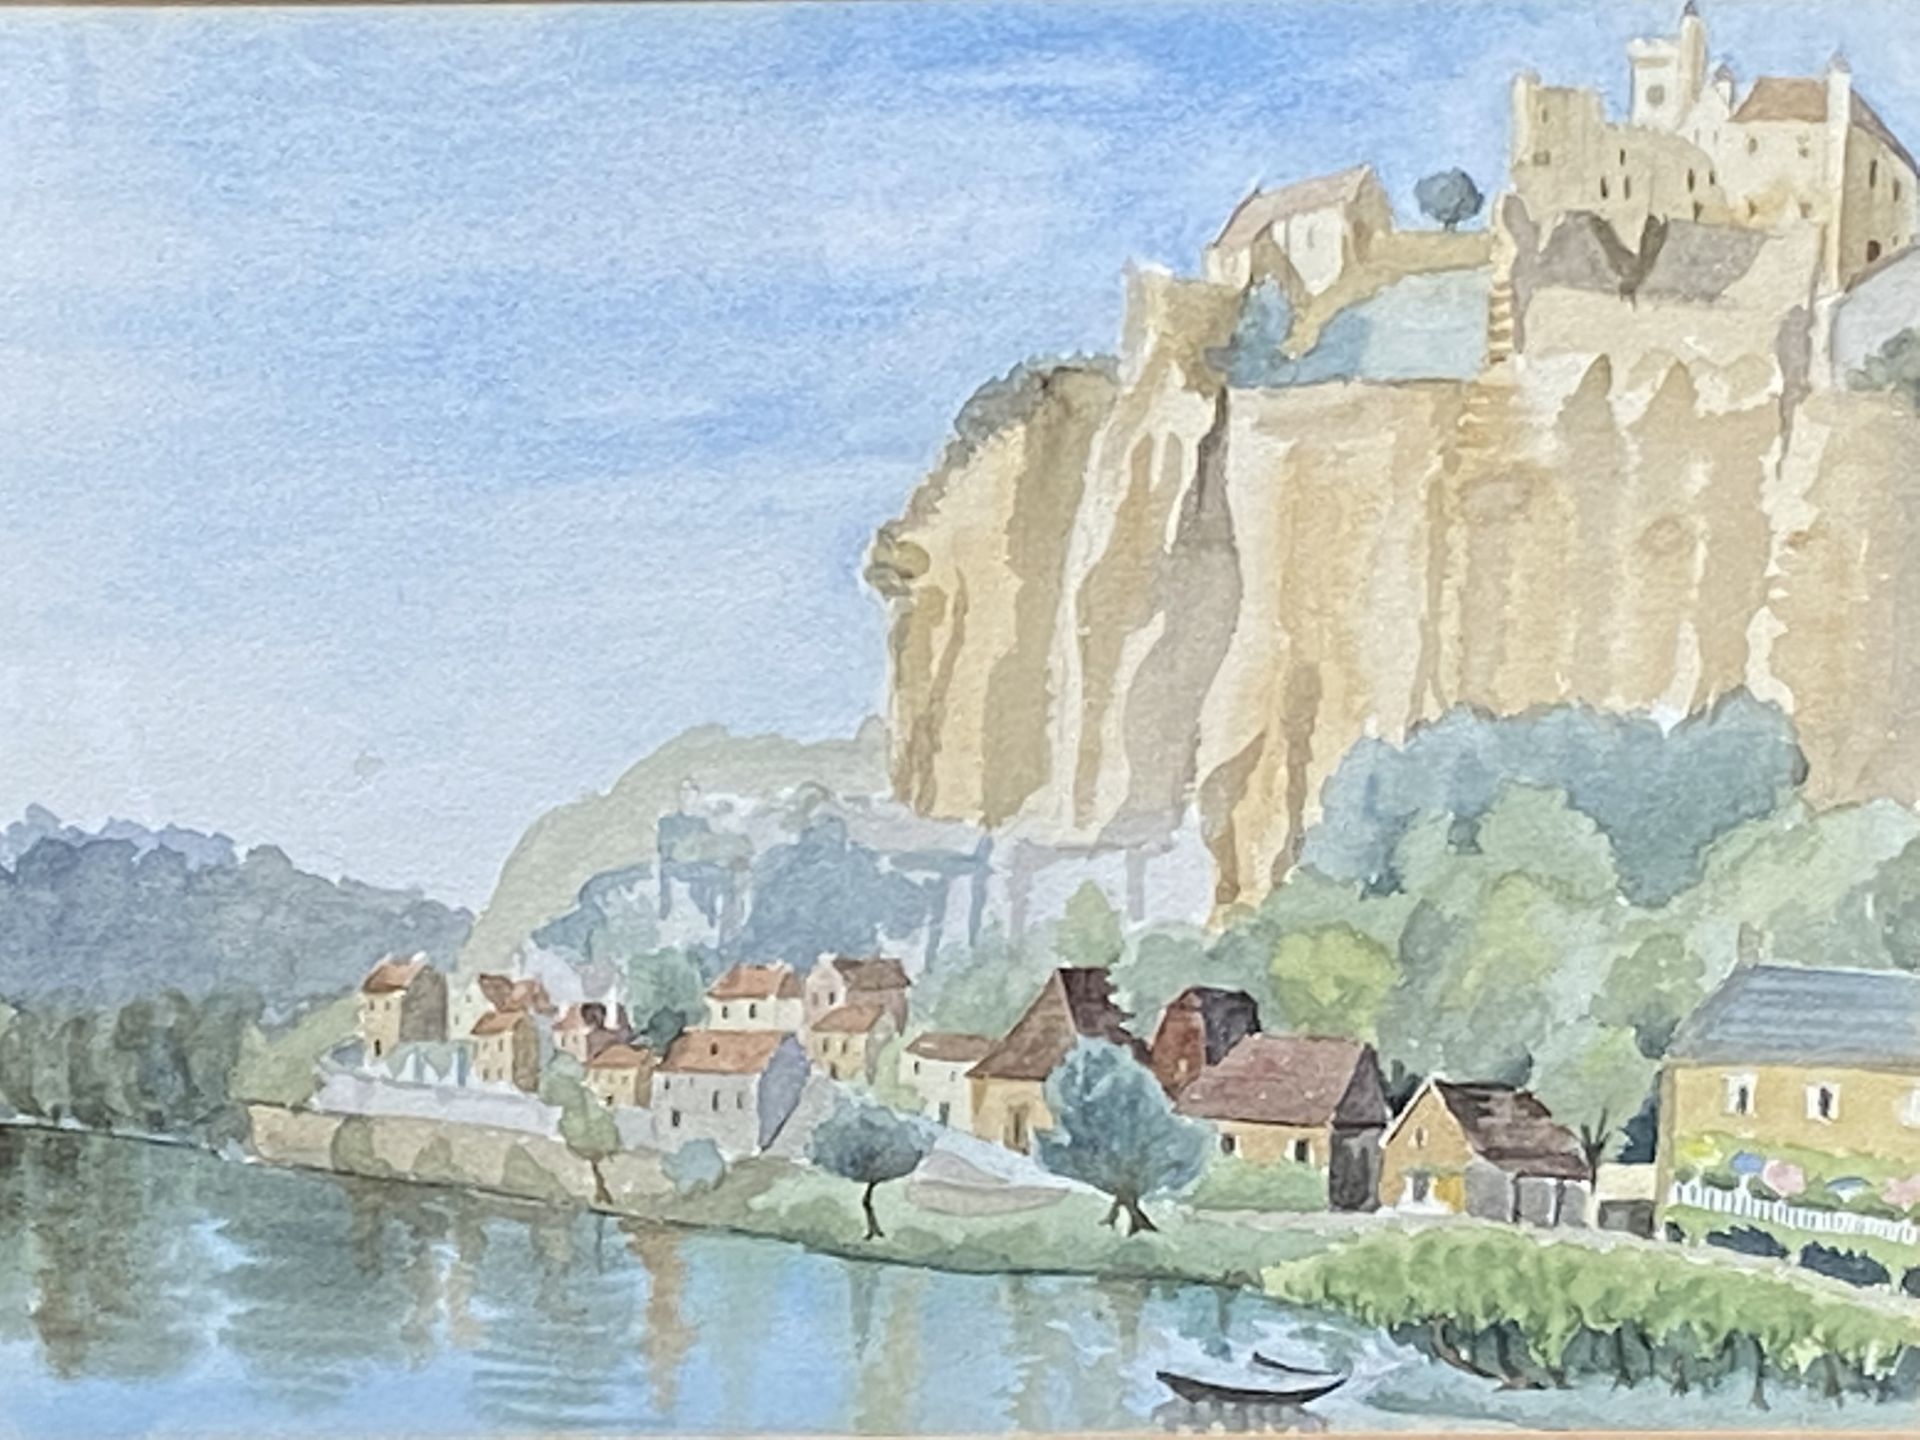 Framed and glazed watercolour of a castle